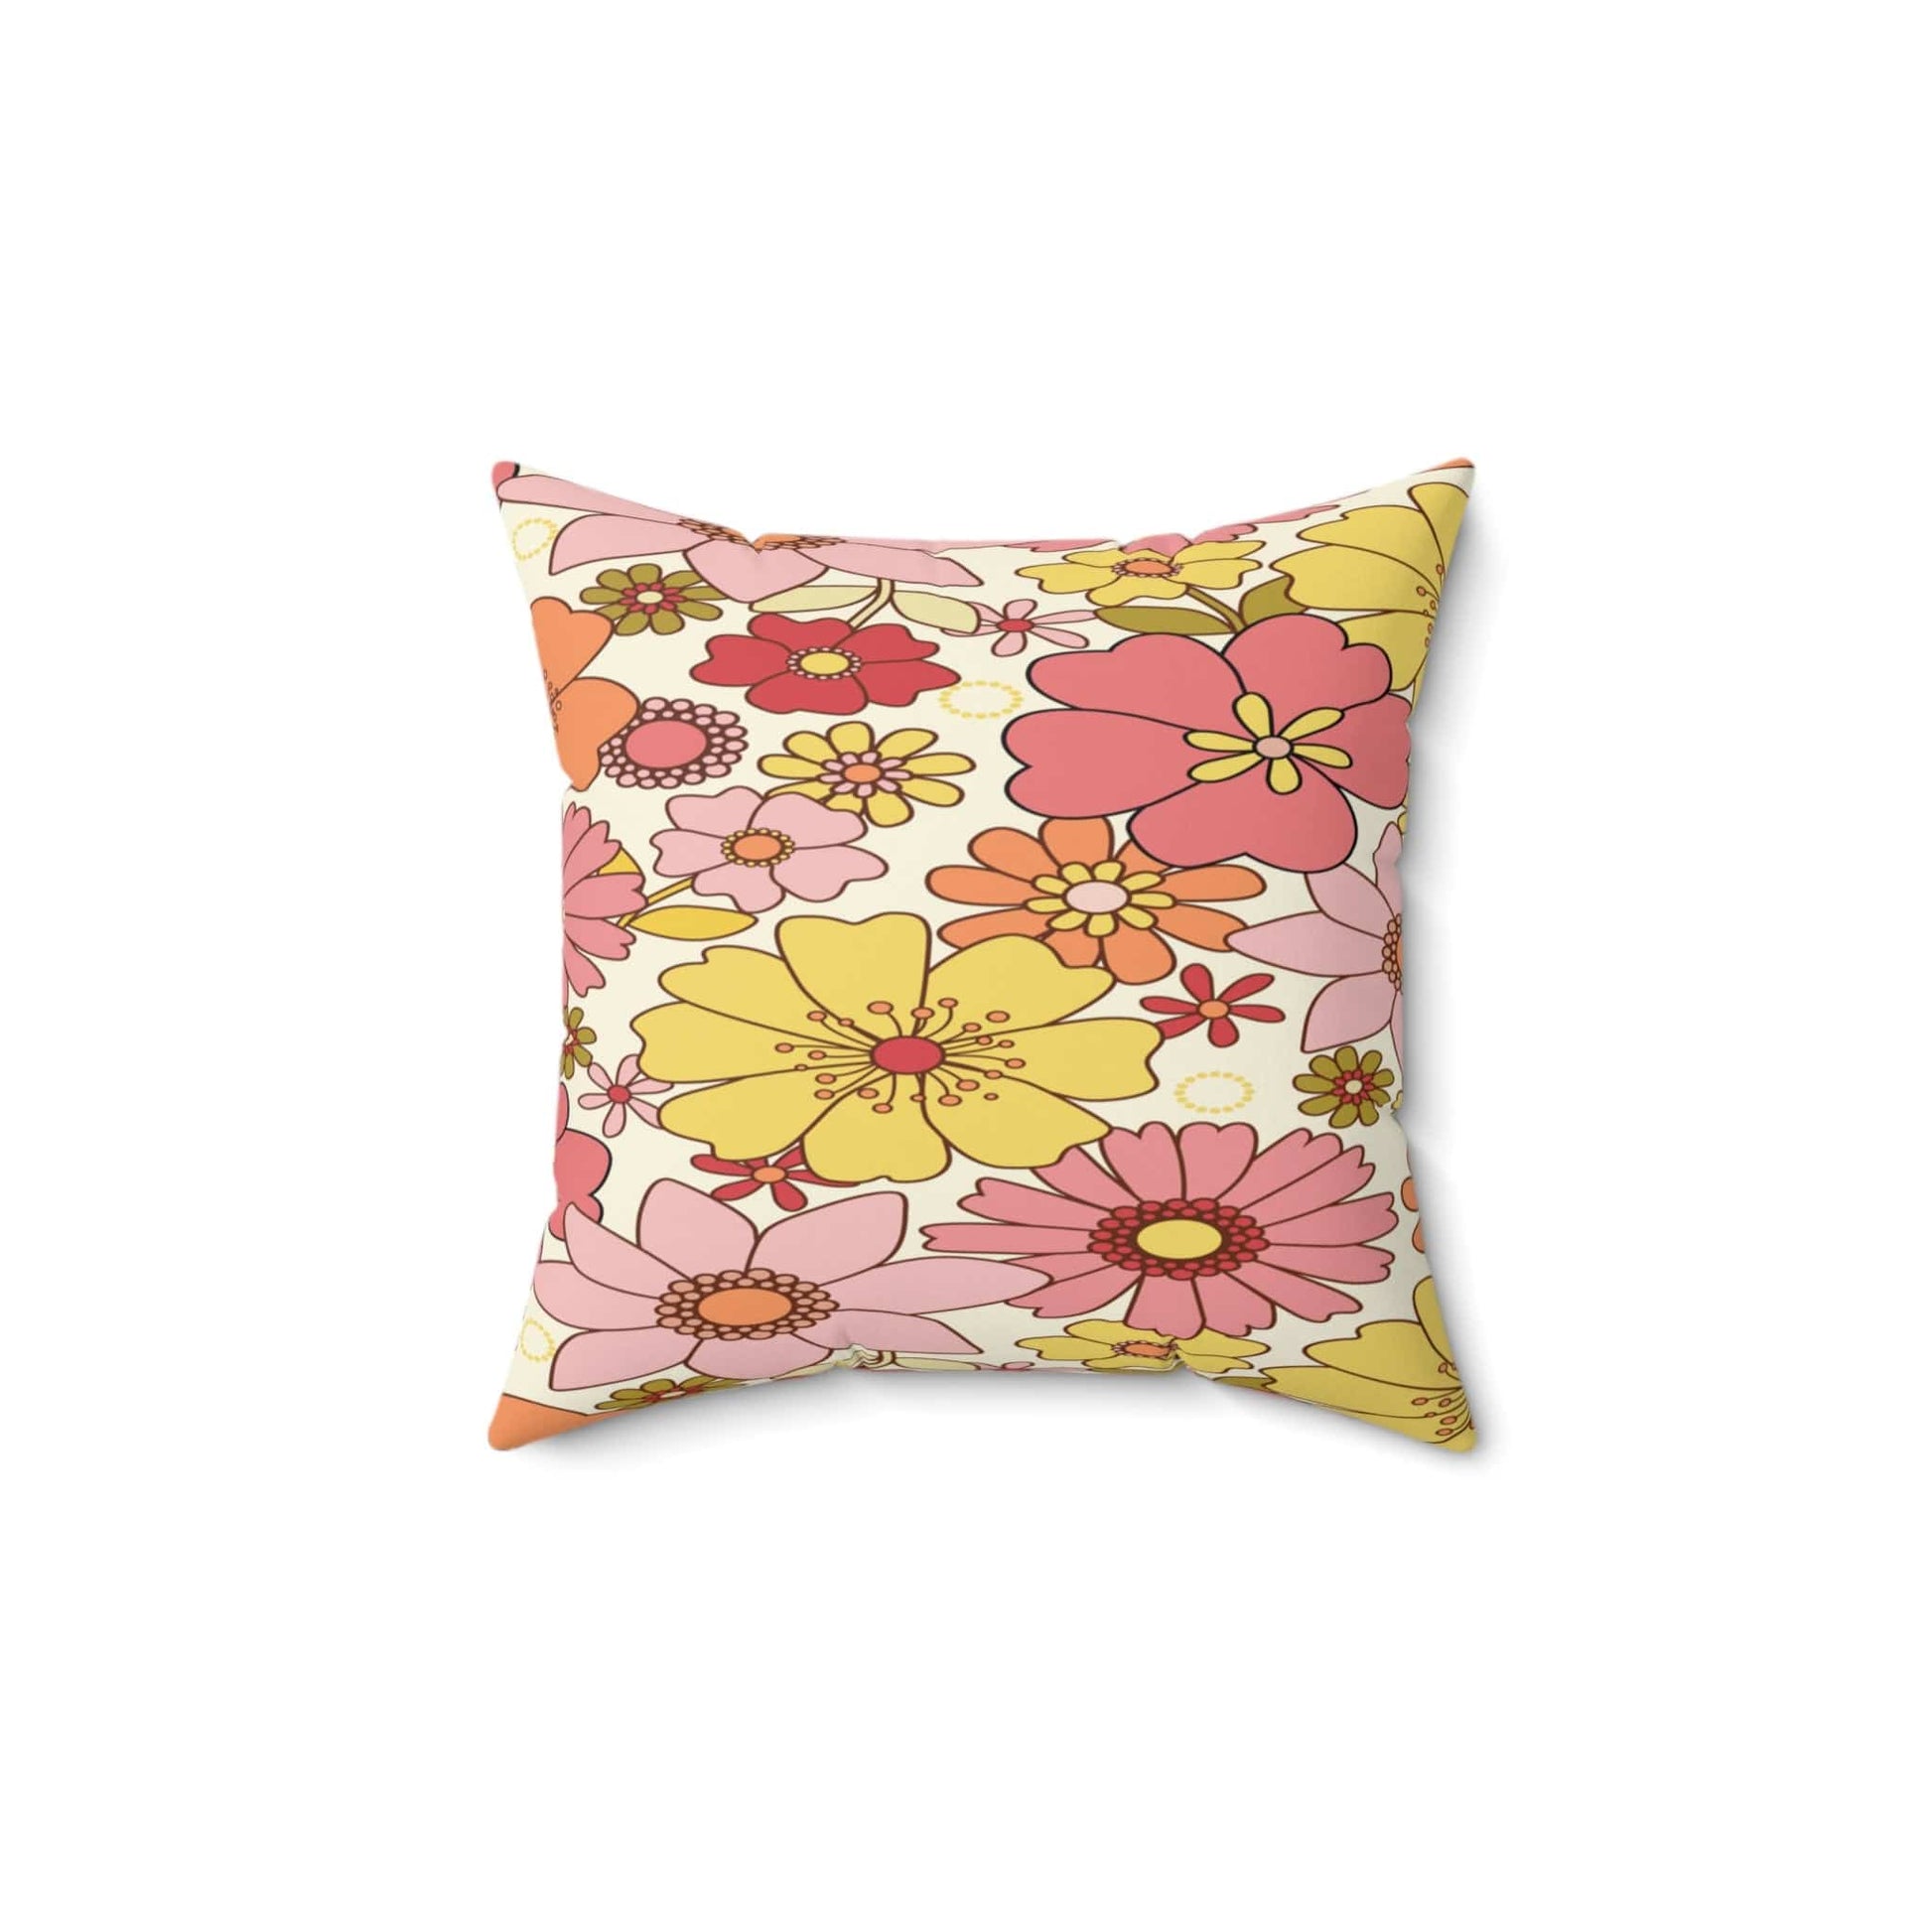 Kate McEnroe New York Retro Floral Throw Pillows with Insert, Flower Power Bohemian Home Decor, Mid Century Modern Living Room and Bedroom Accent Pillows